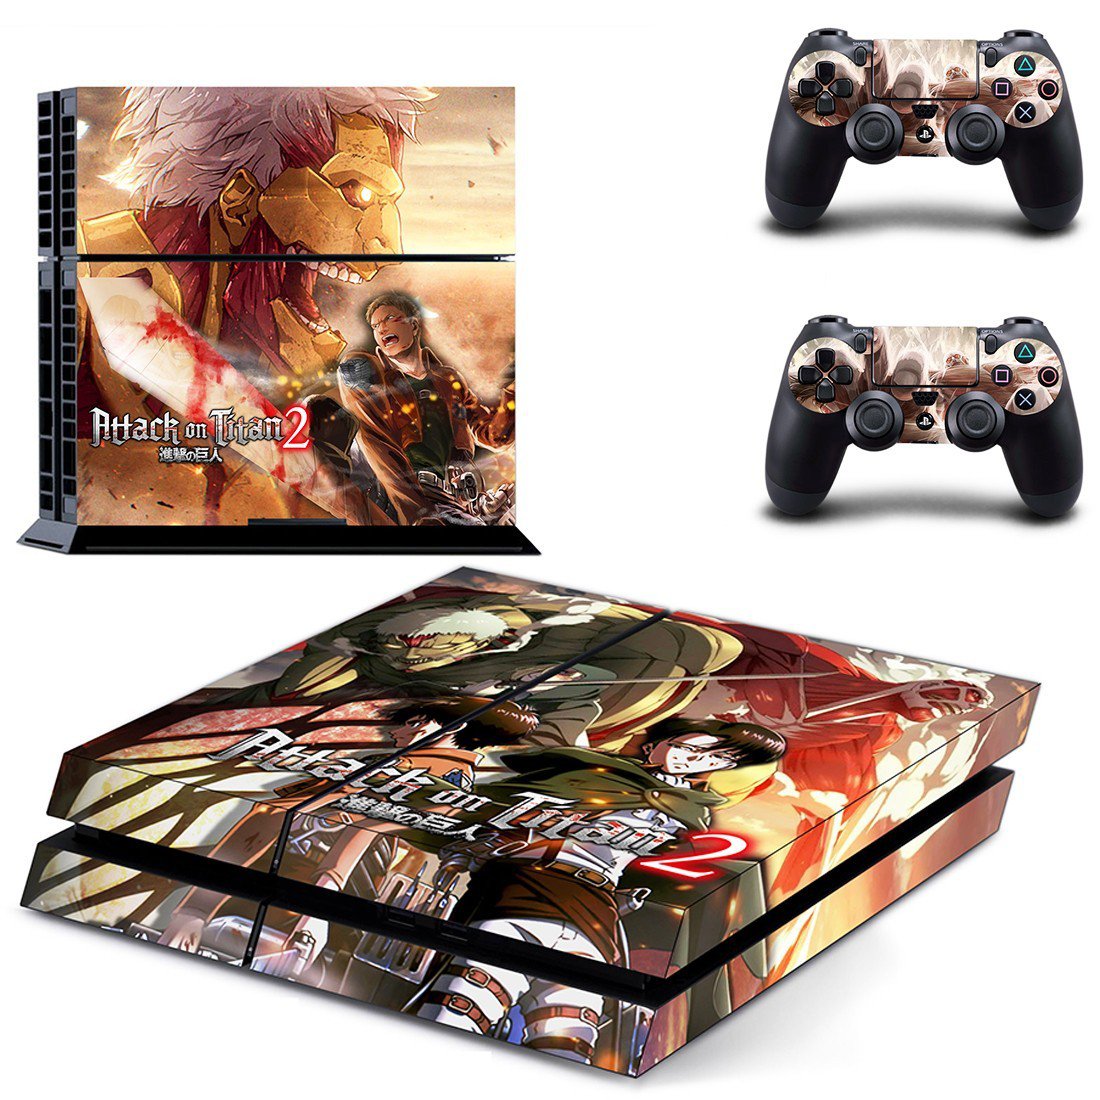 Attack On Titan 2 Decal Skin Sticker For Ps4 Console And